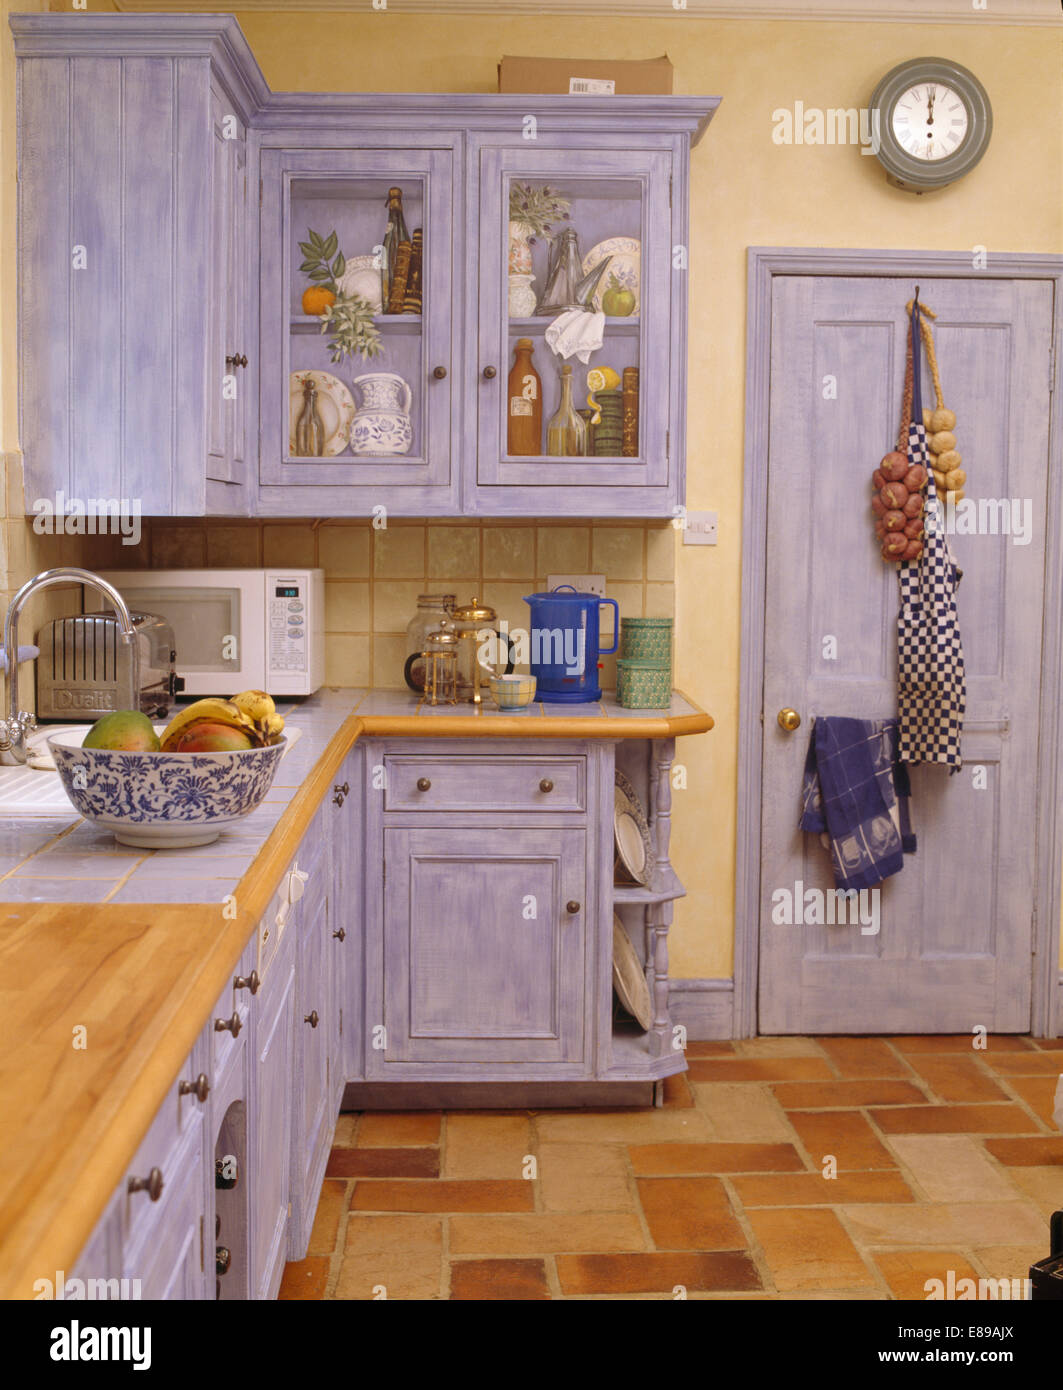 Trompe-l'oeil on cupboard in kitchen with dragging effect fitted blue cupboards Stock Photo